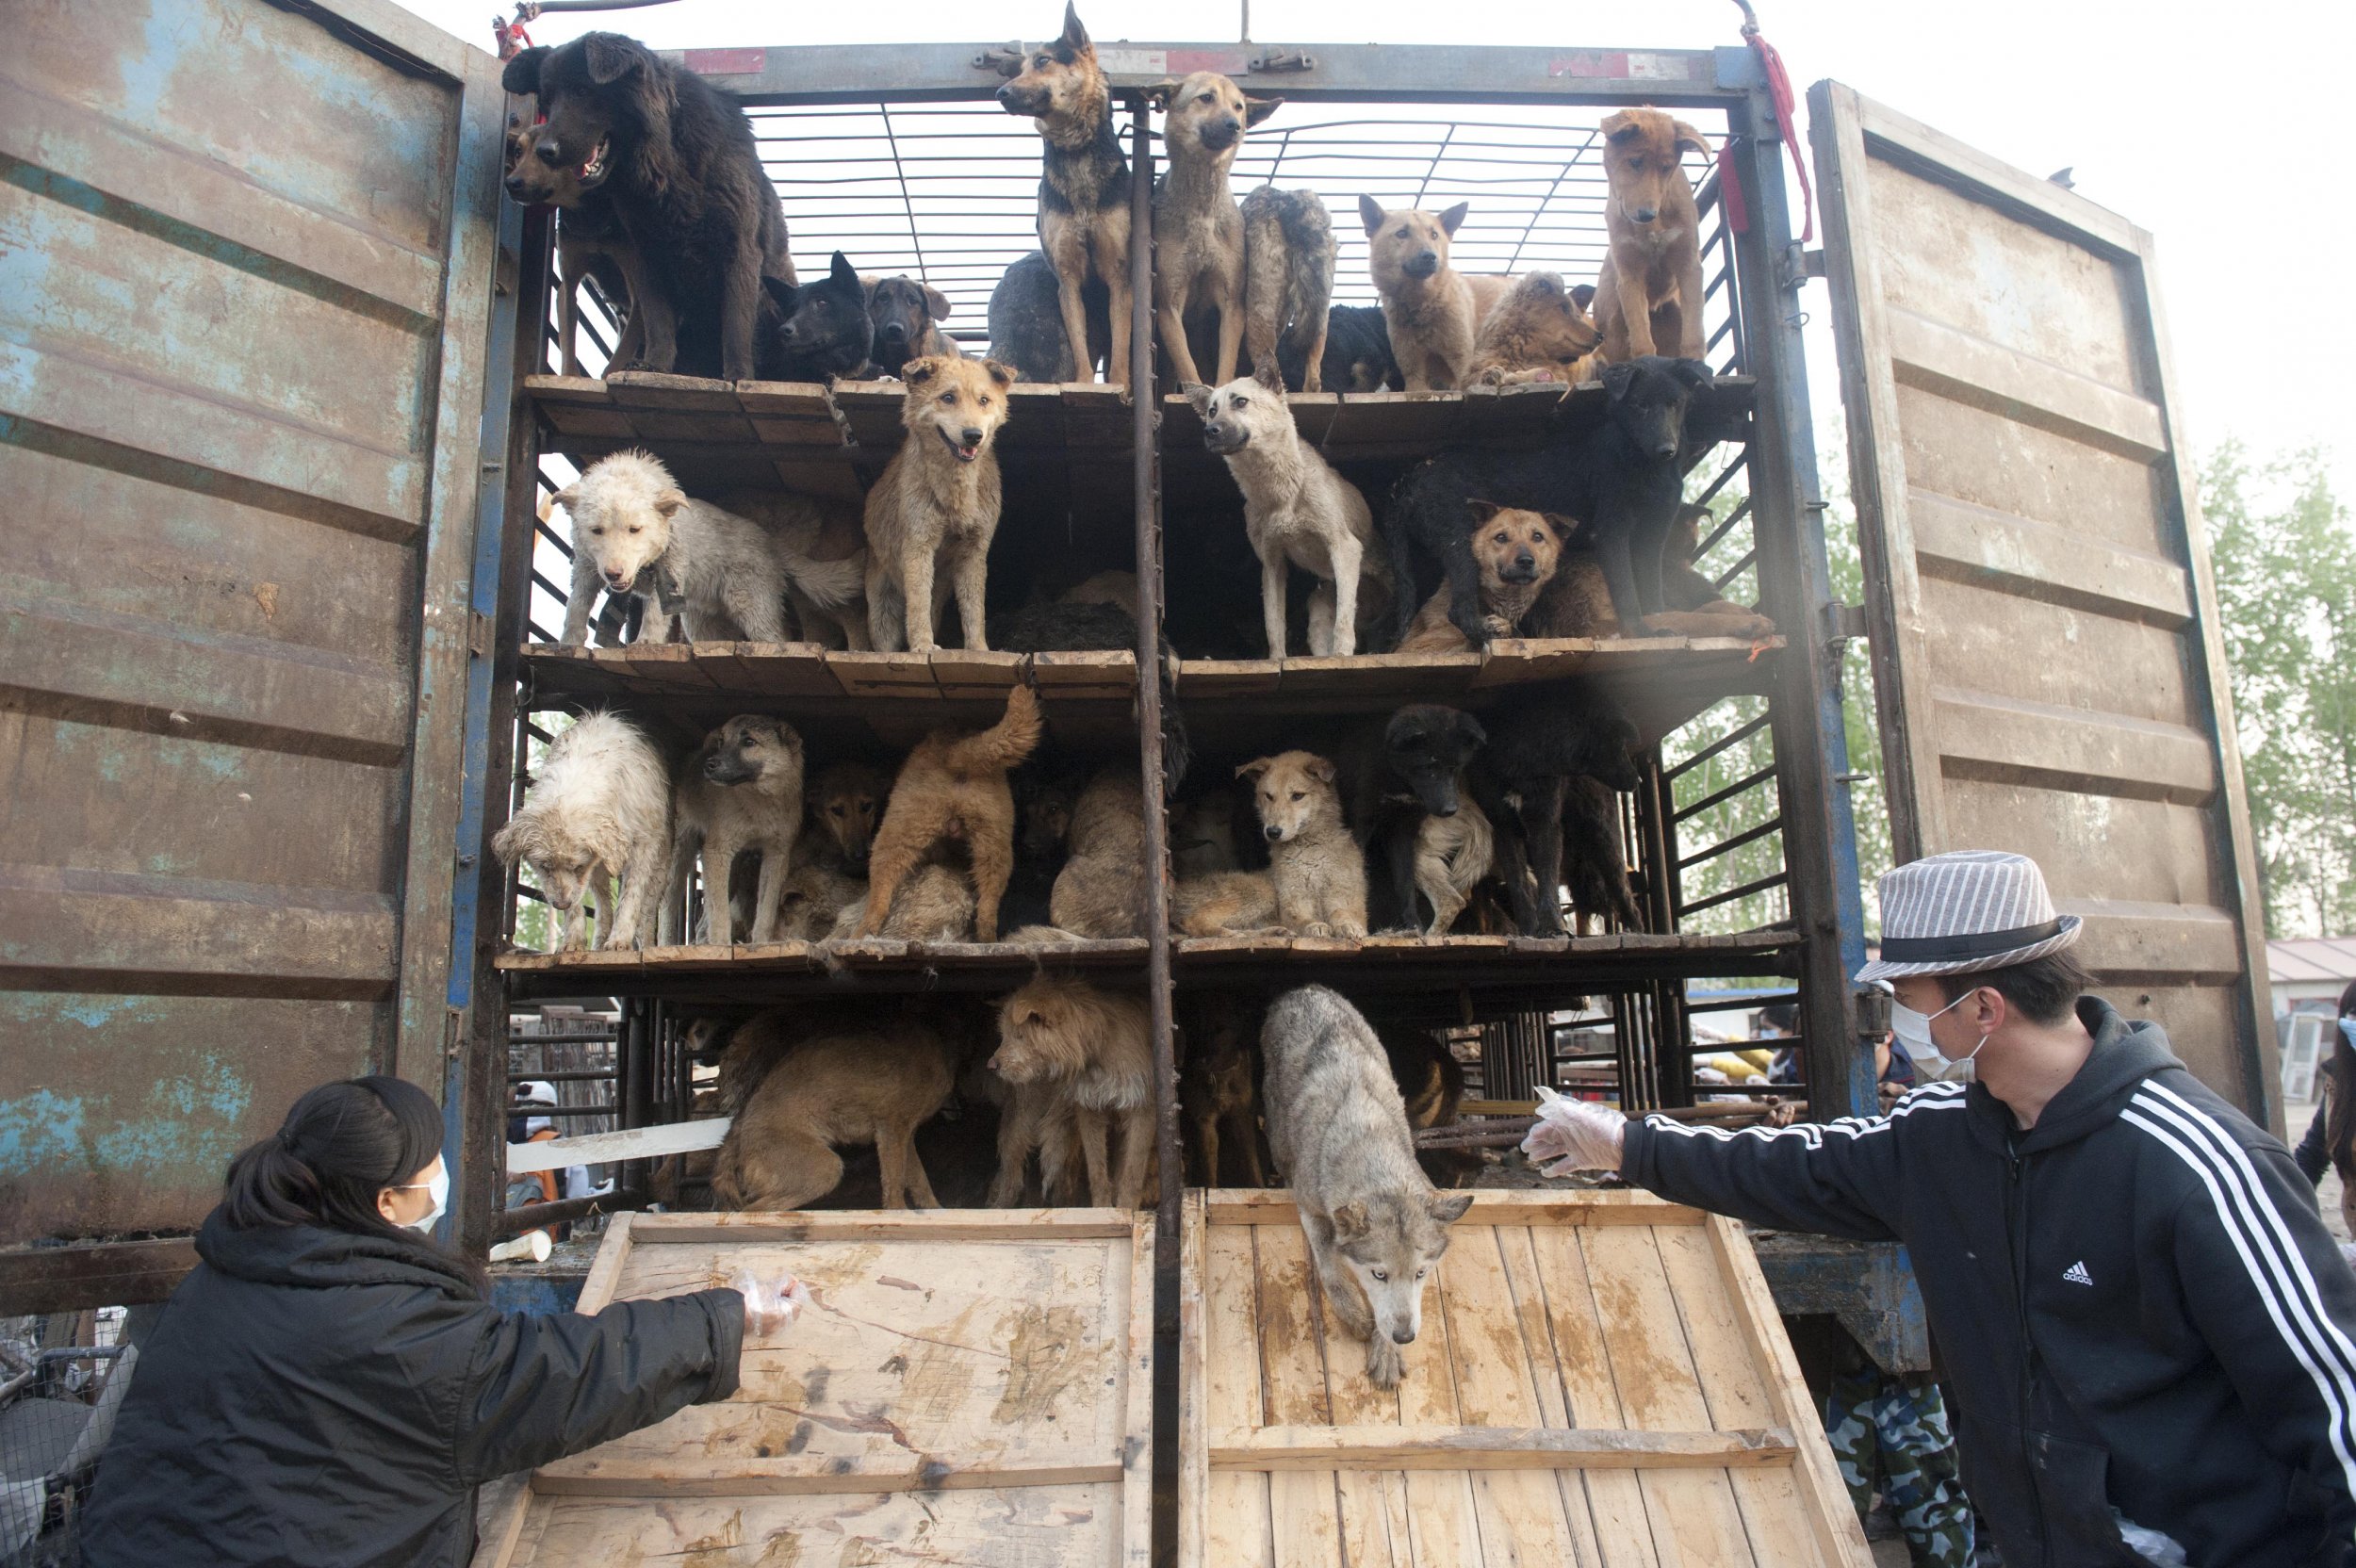 Ahead of Yulin Dog Meat Festival, U.S. and China Rescue Groups Work to